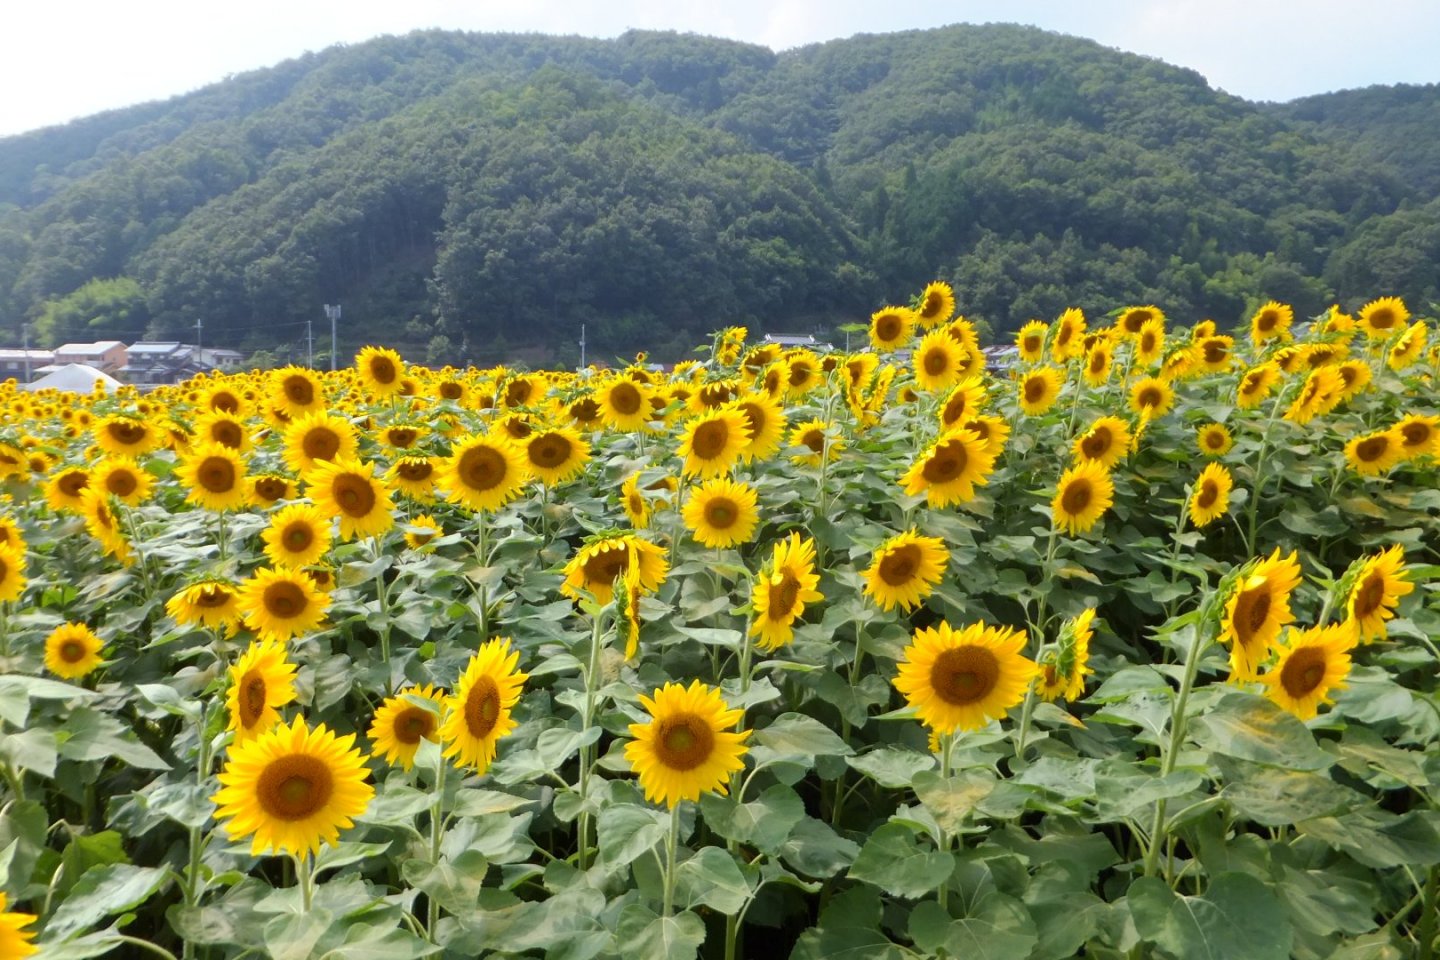 Over one and a half million sunflowers are on display at this event